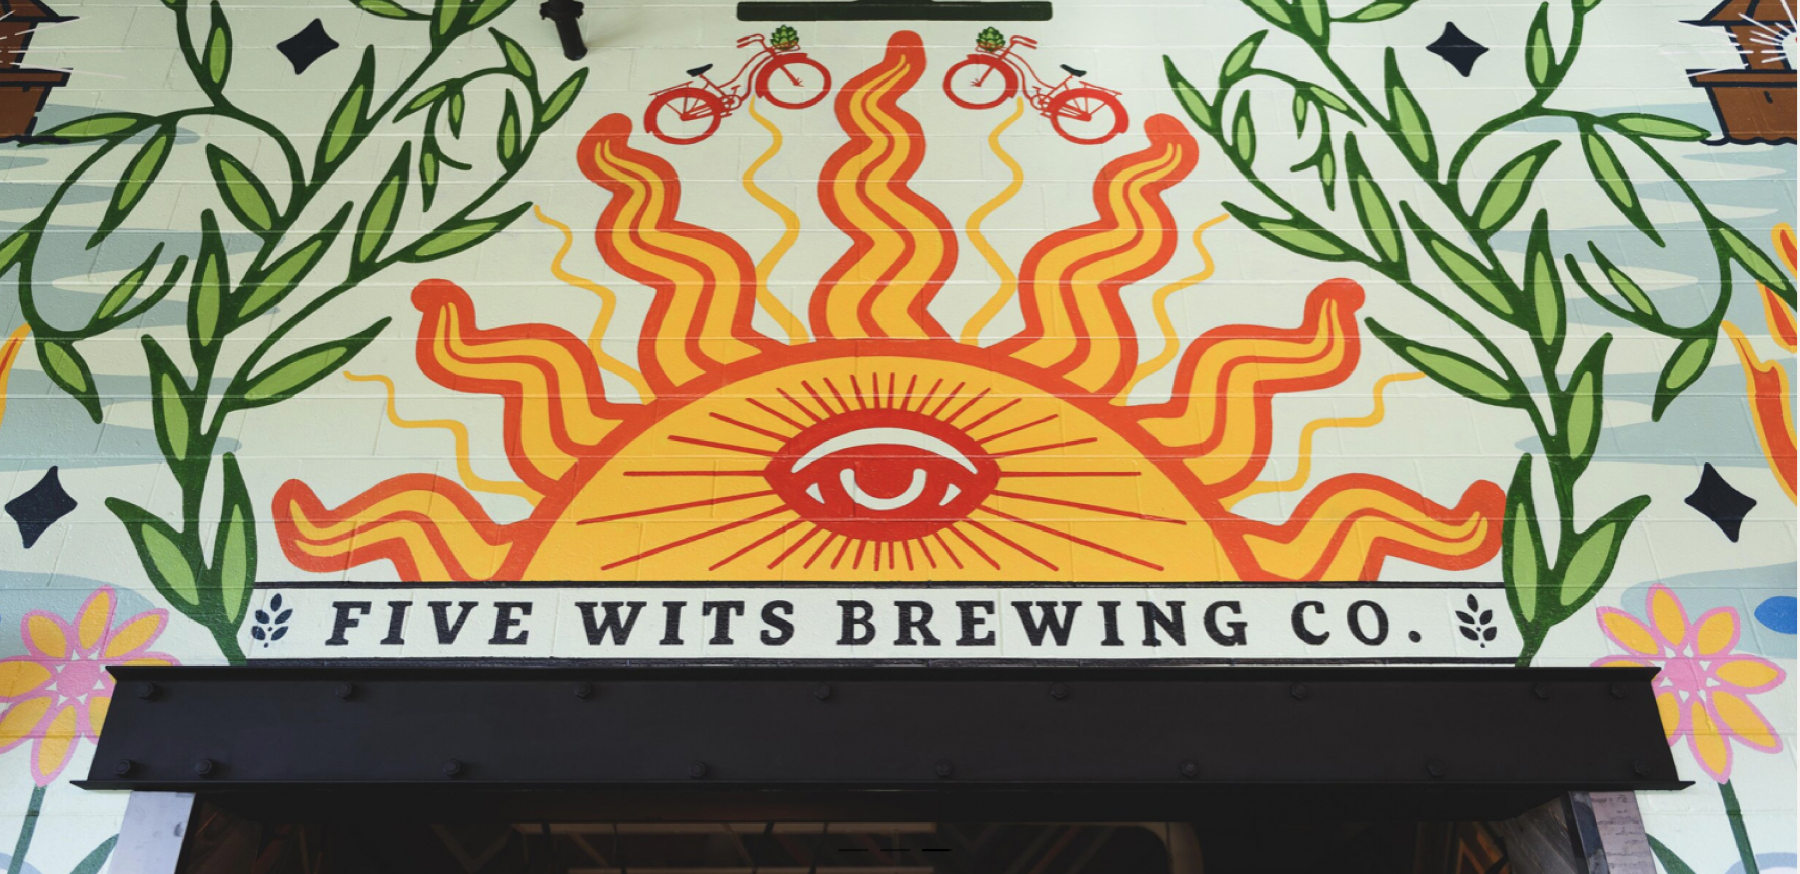 Five Wits Brewing Company